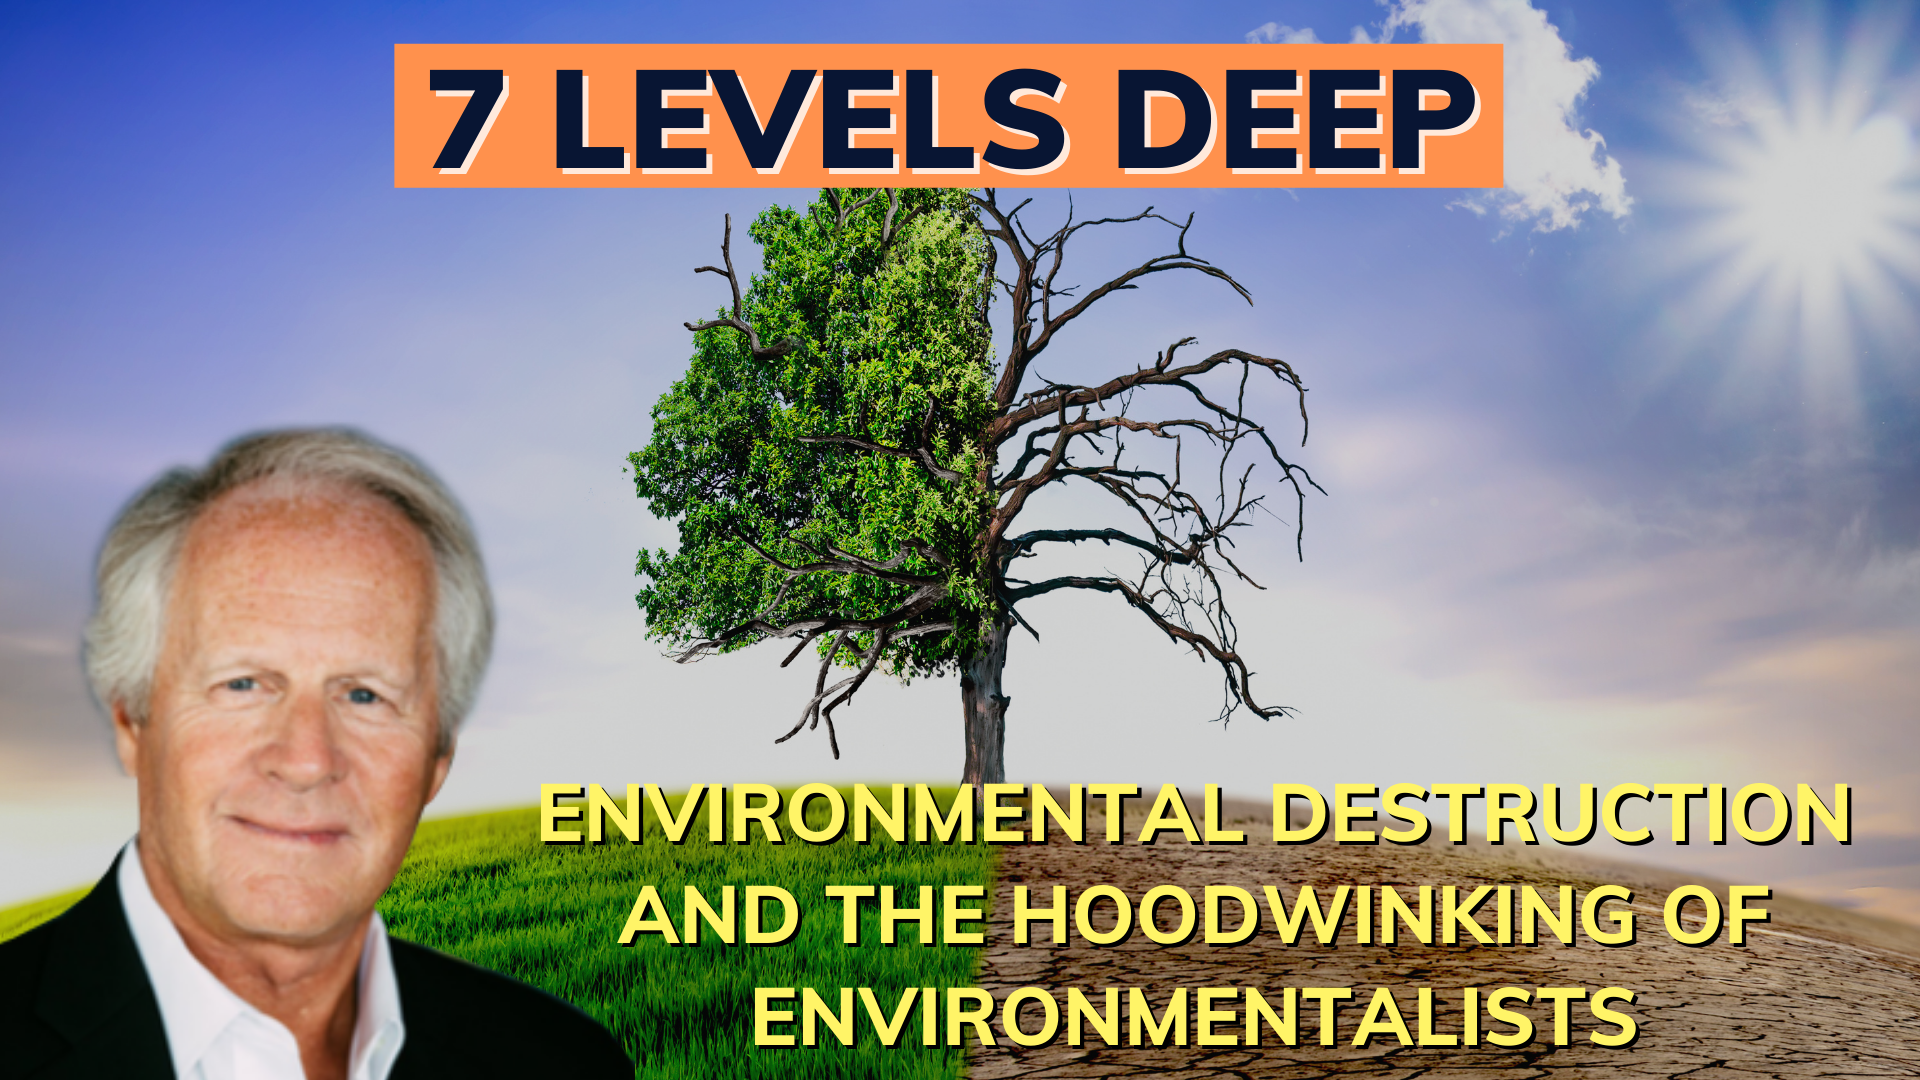 Environmental Destruction and the Hoodwinking of Environmentalists